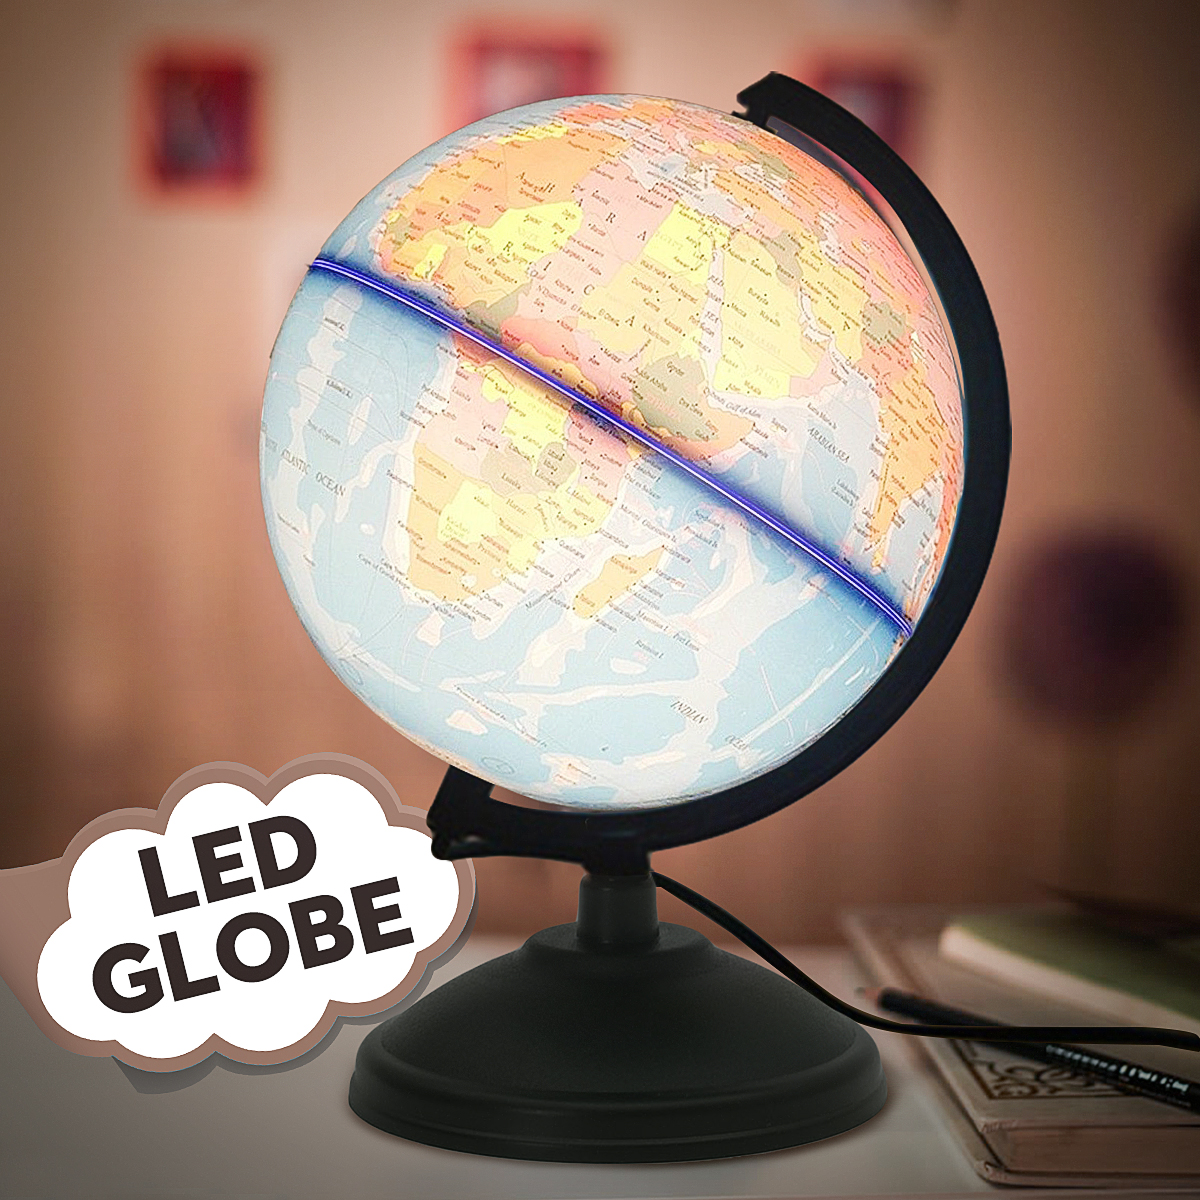 World-Earth-Globe-Atlas-Map-Geography-Education-Gift-w-Rotating-Stand-LED-light-1256065-2